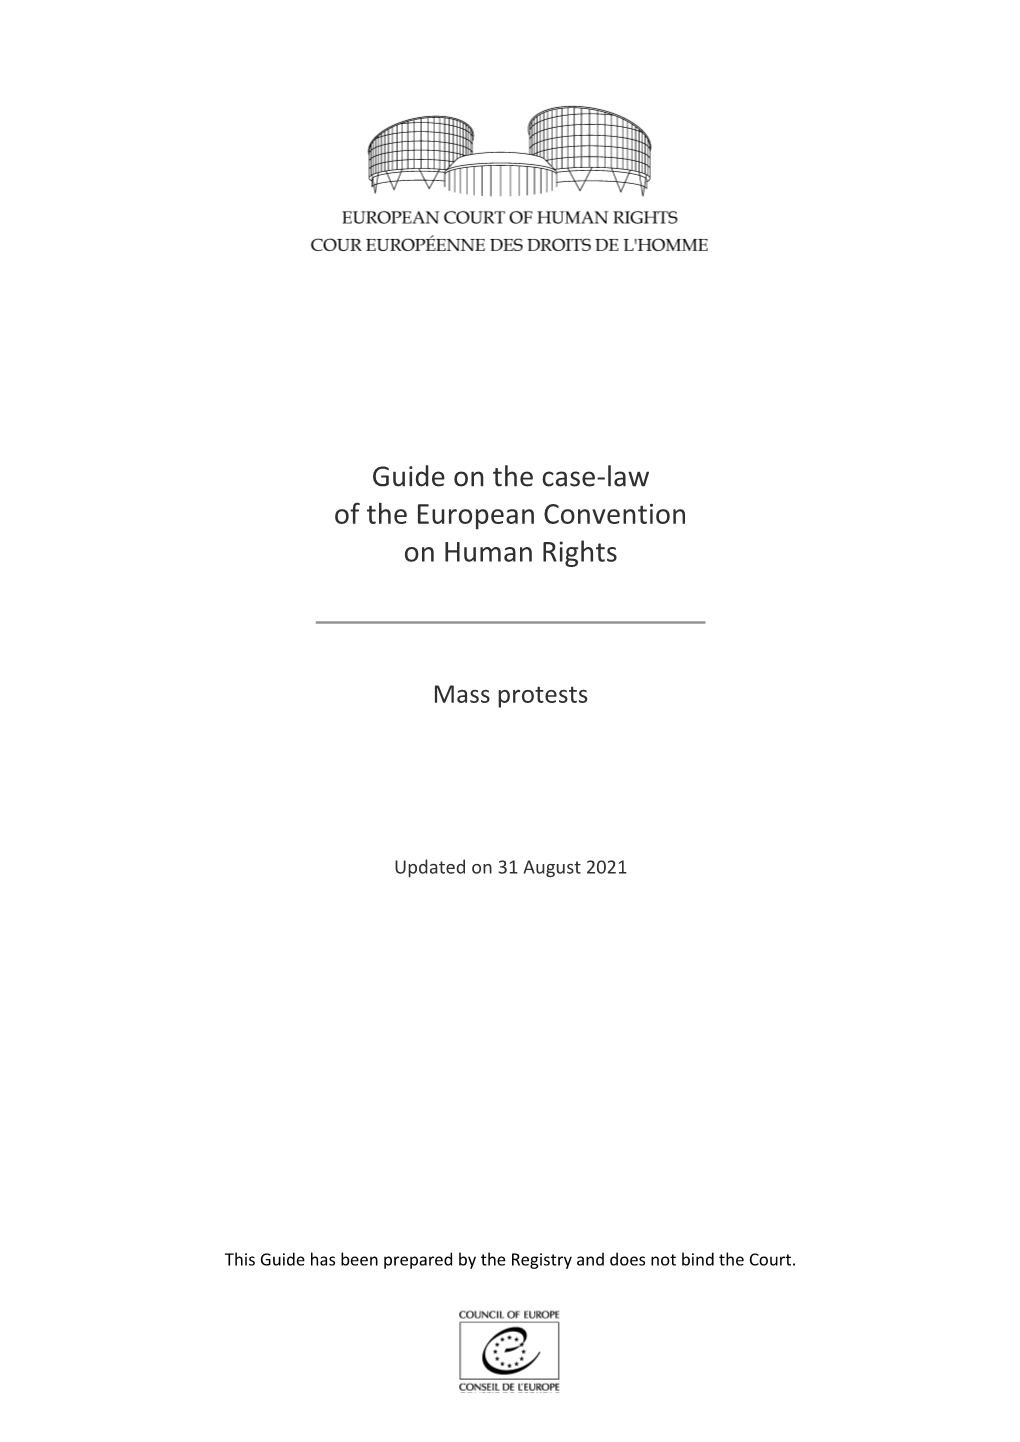 Guide on the Case-Law of the European Convention on Human Rights